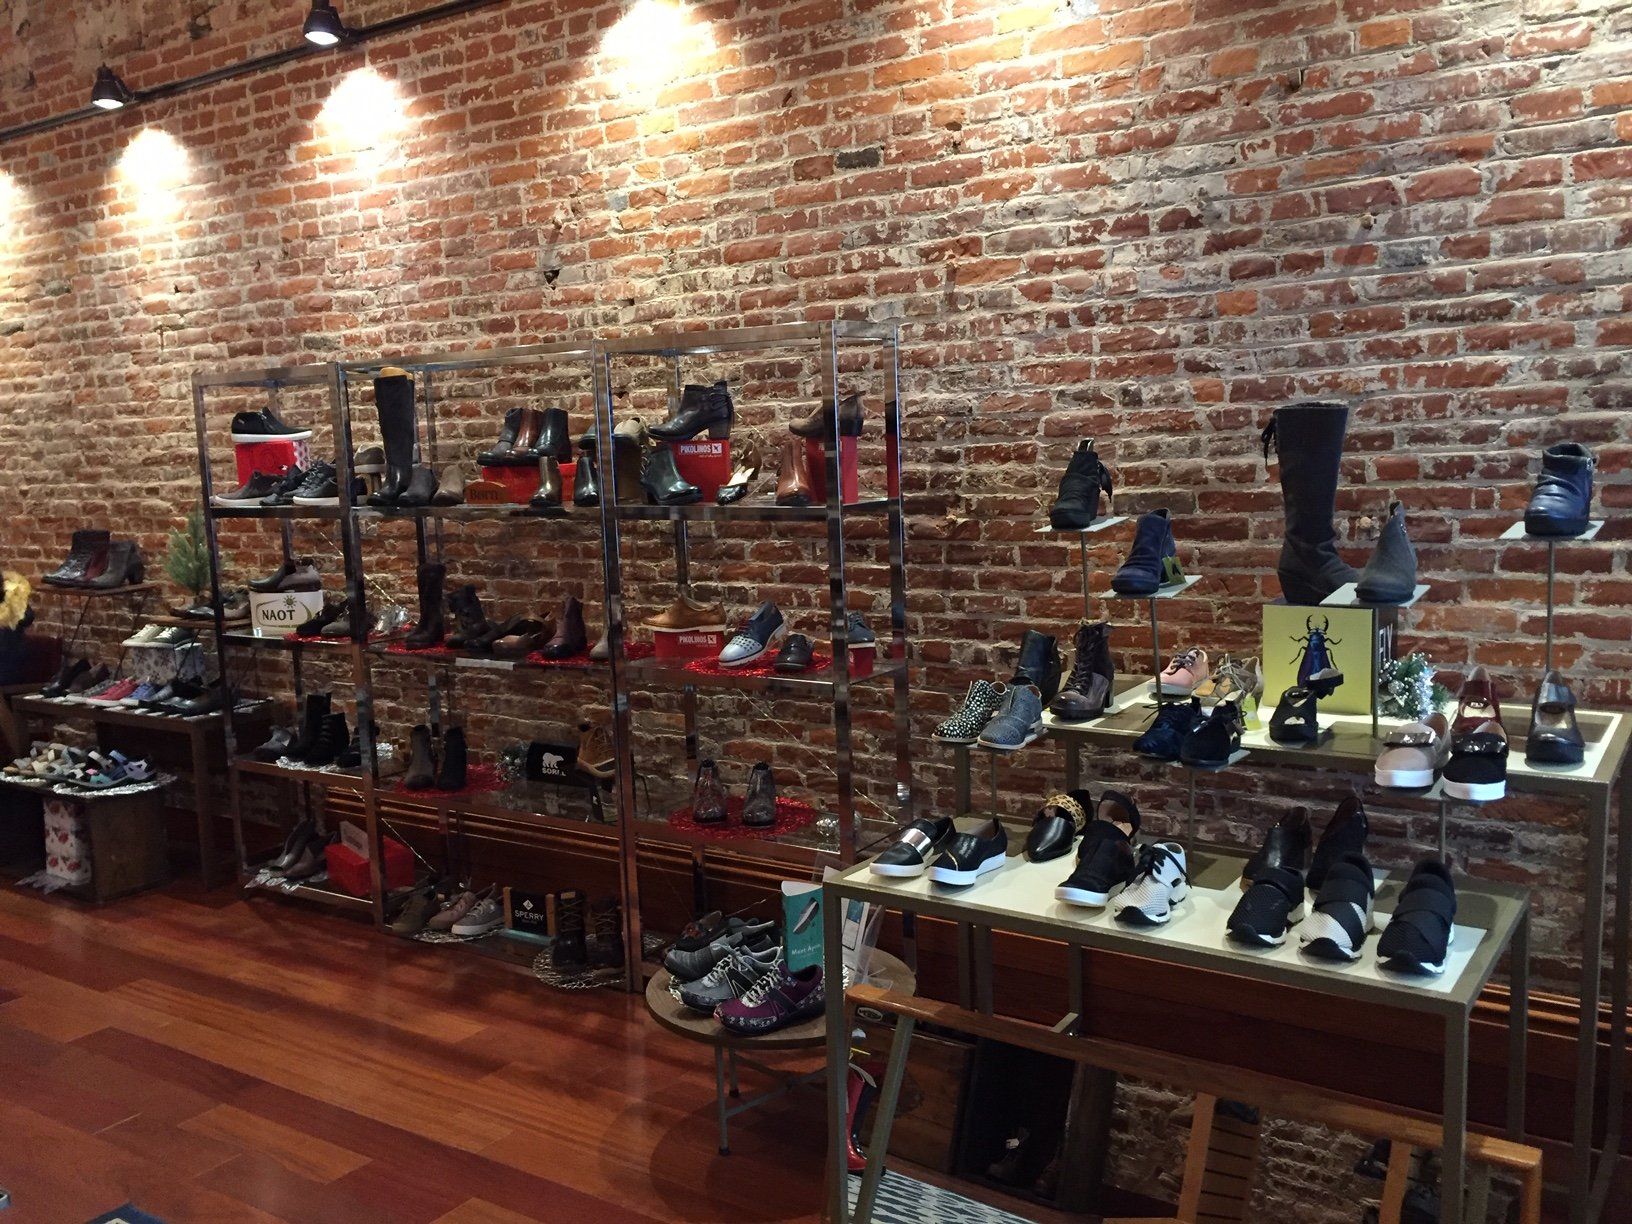 A store filled with lots of shoes and a brick wall.